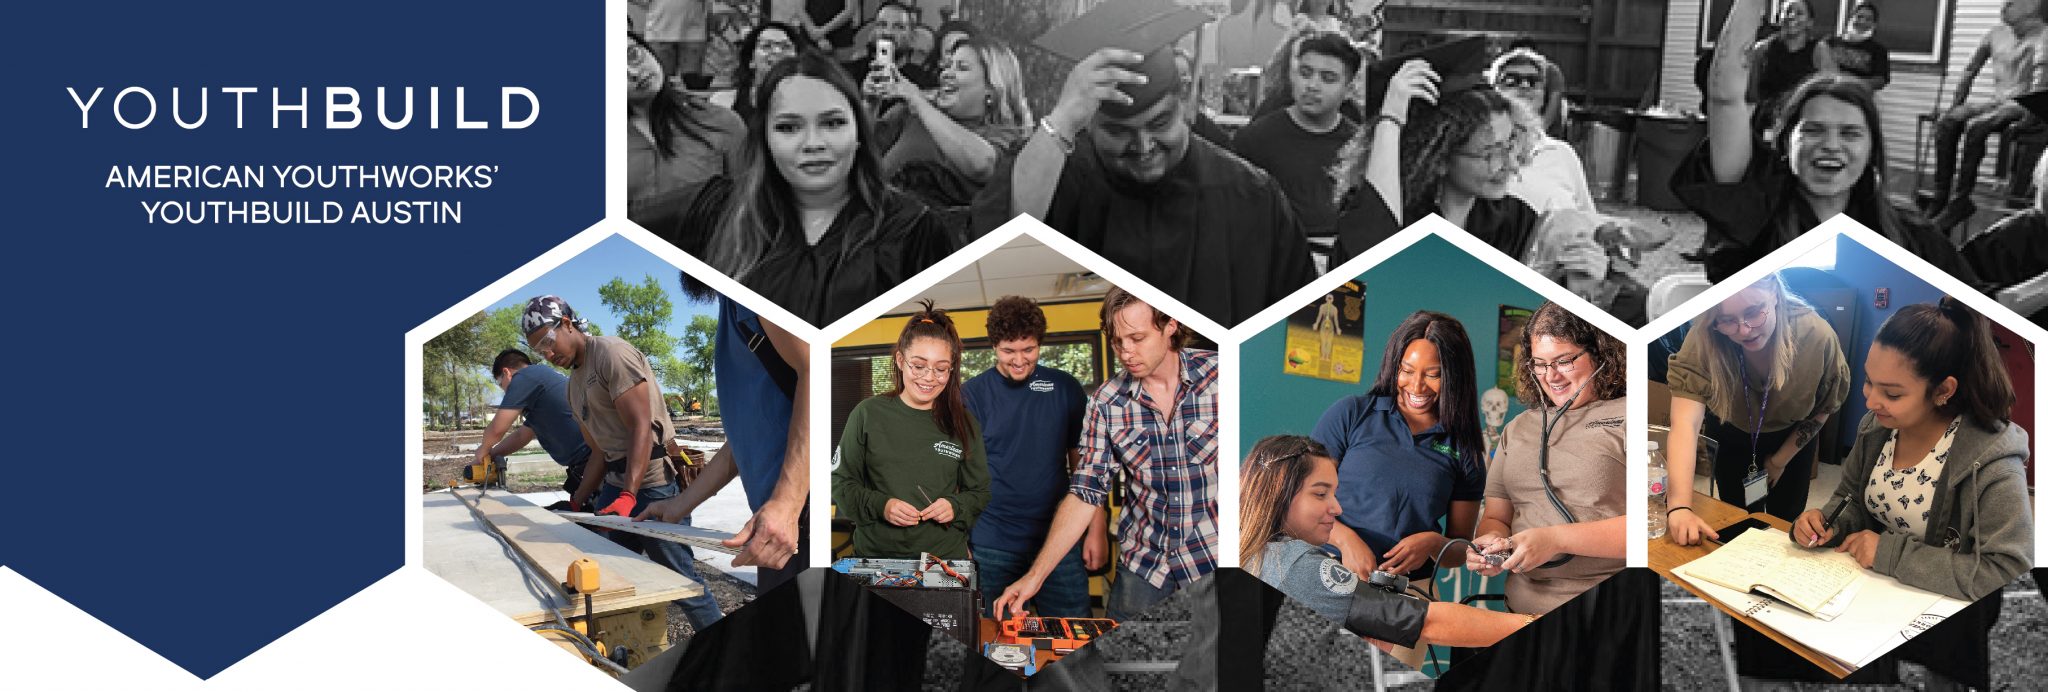 The YouthBuild Austin logo, and a collage of participants developing career skills, studying, and graduating.